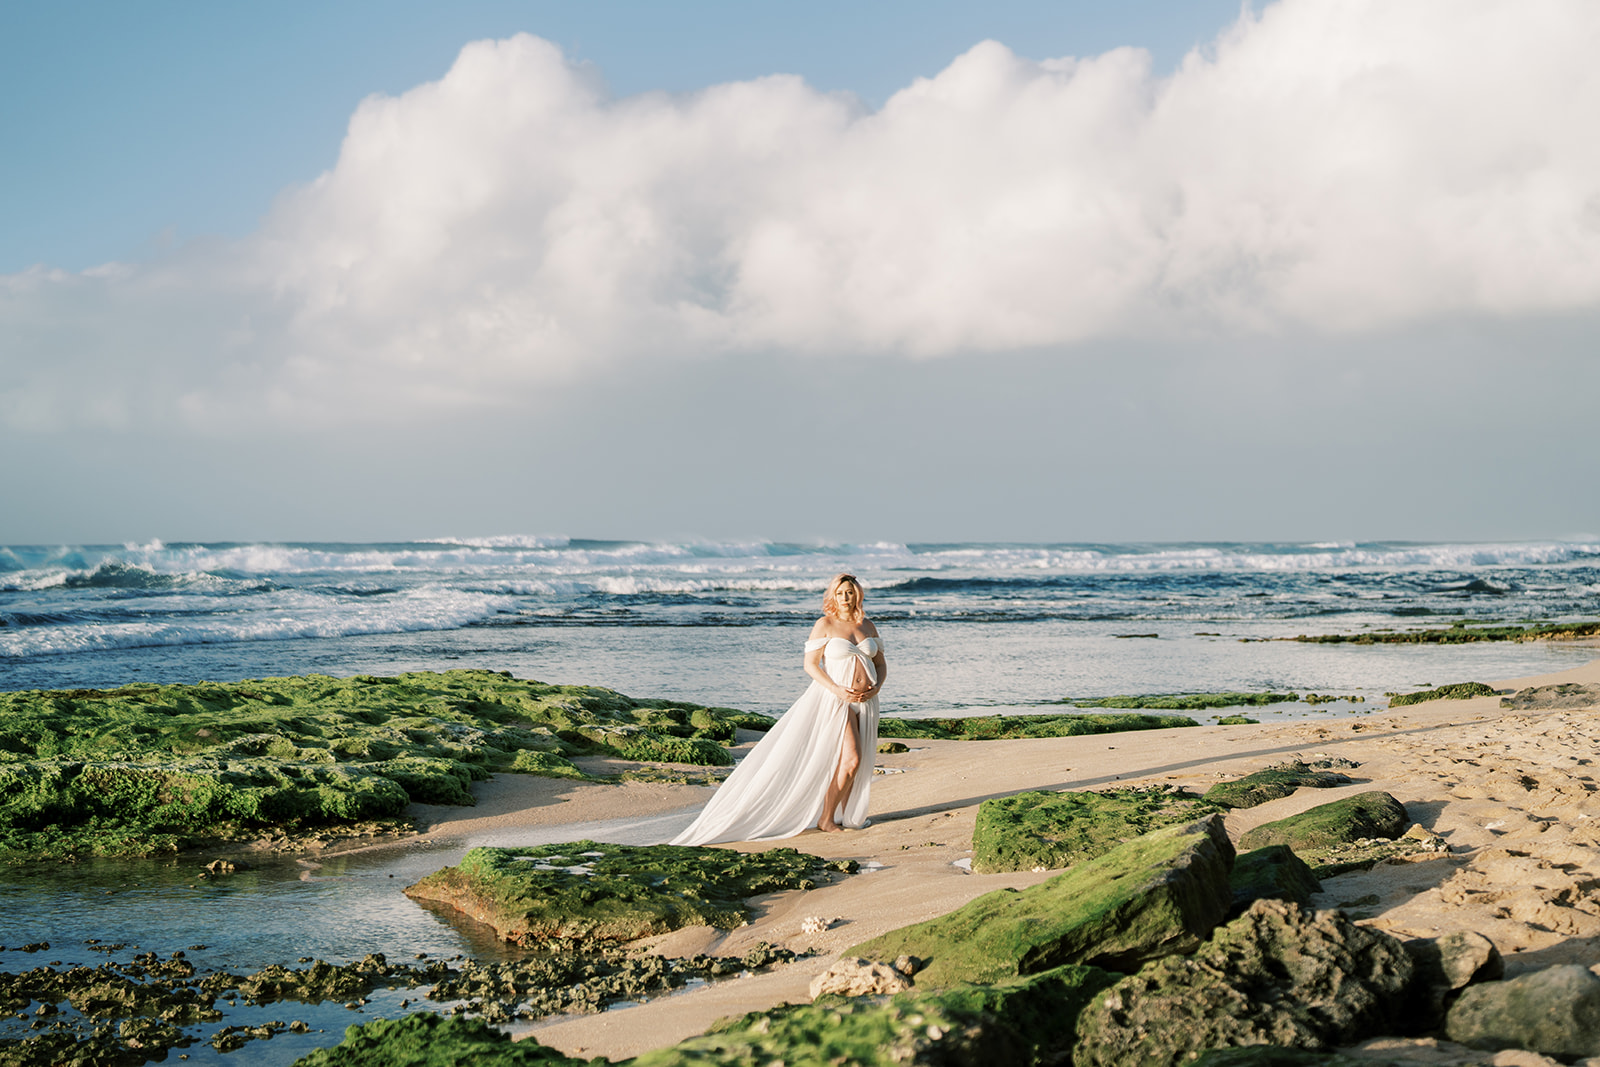 A pregnant woman in a white dress standing on a beach with waves in the background Maternity session captured by Megan M